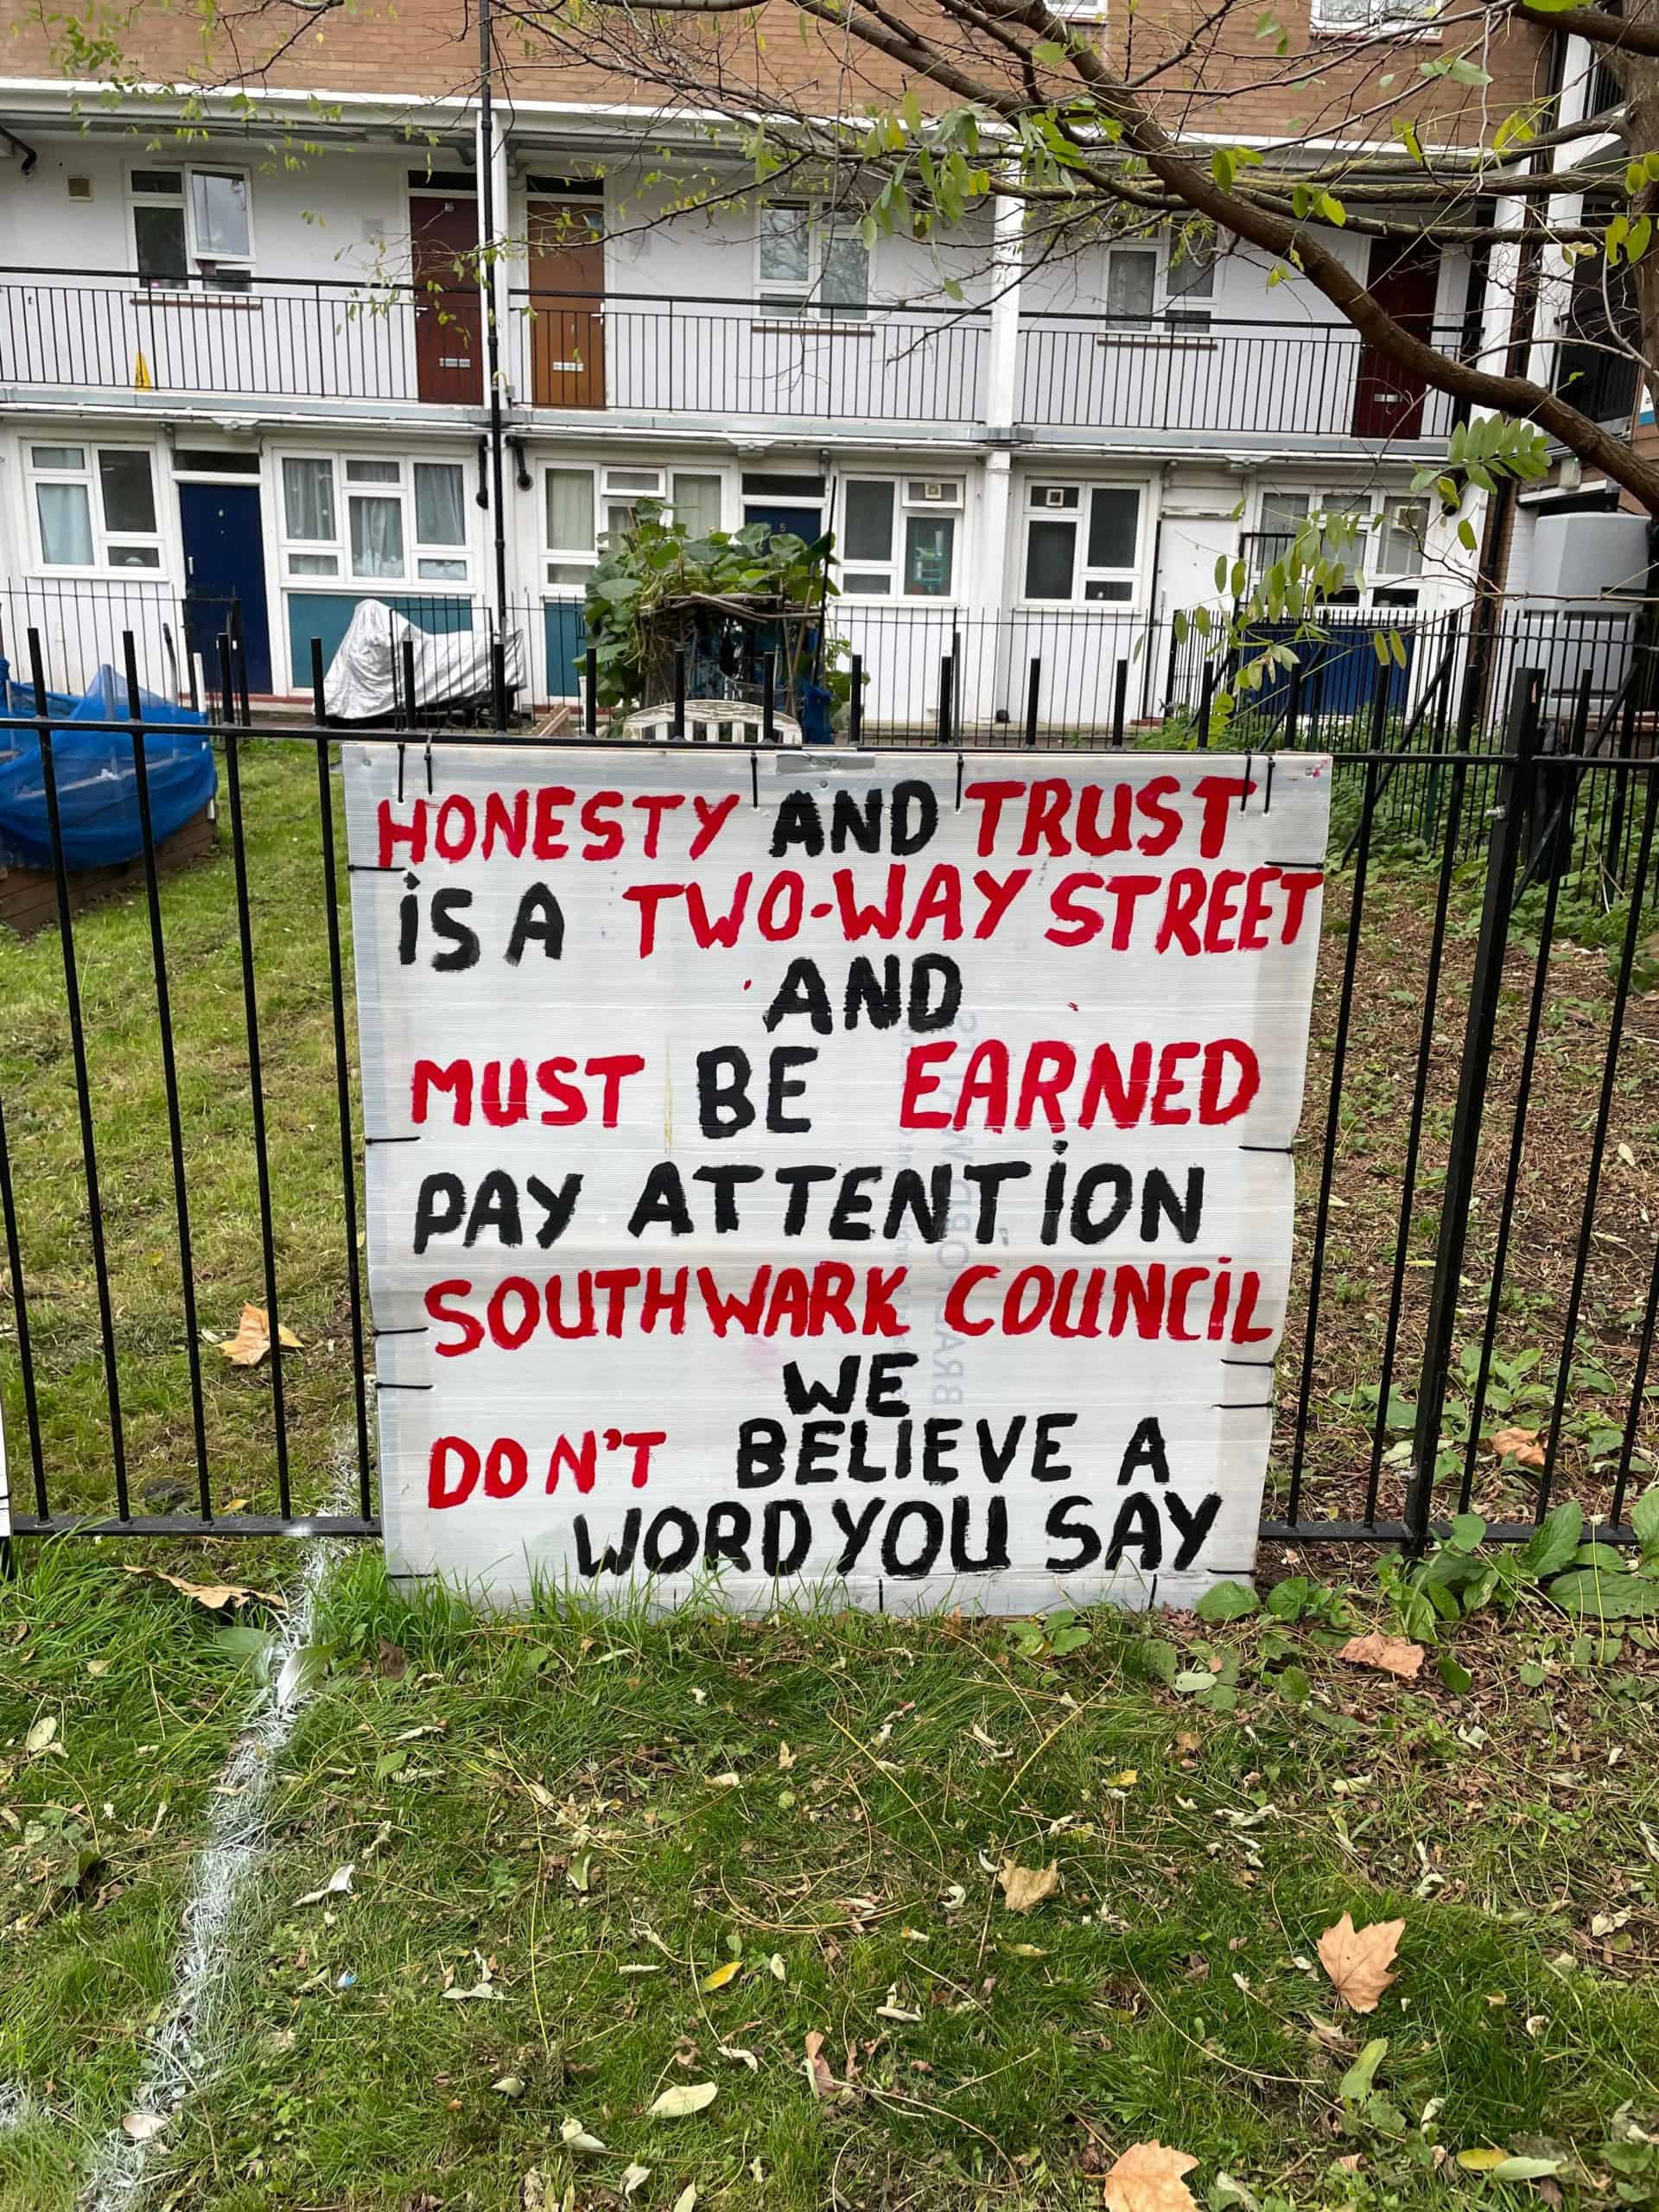 The signs directly call on Southwark Council